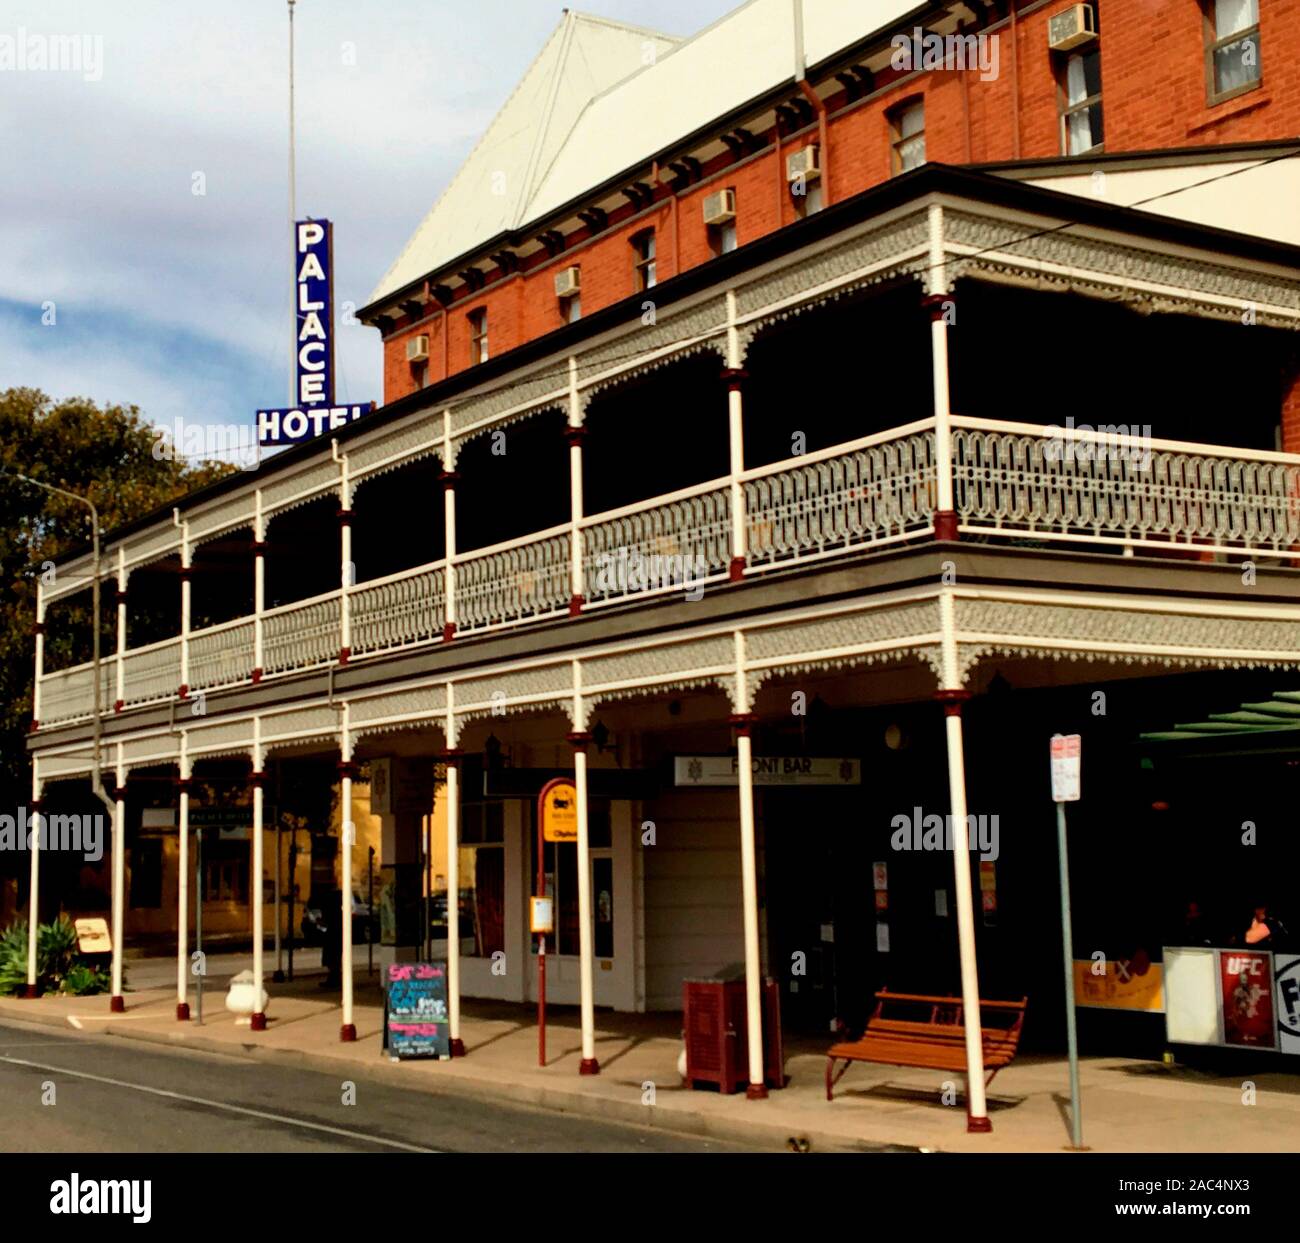 Palace Hotel in Broken Hill, NSW, setting for films such as Priscilla Queen of the Desert. Location of an annual Drag Queen Festival. Stock Photo